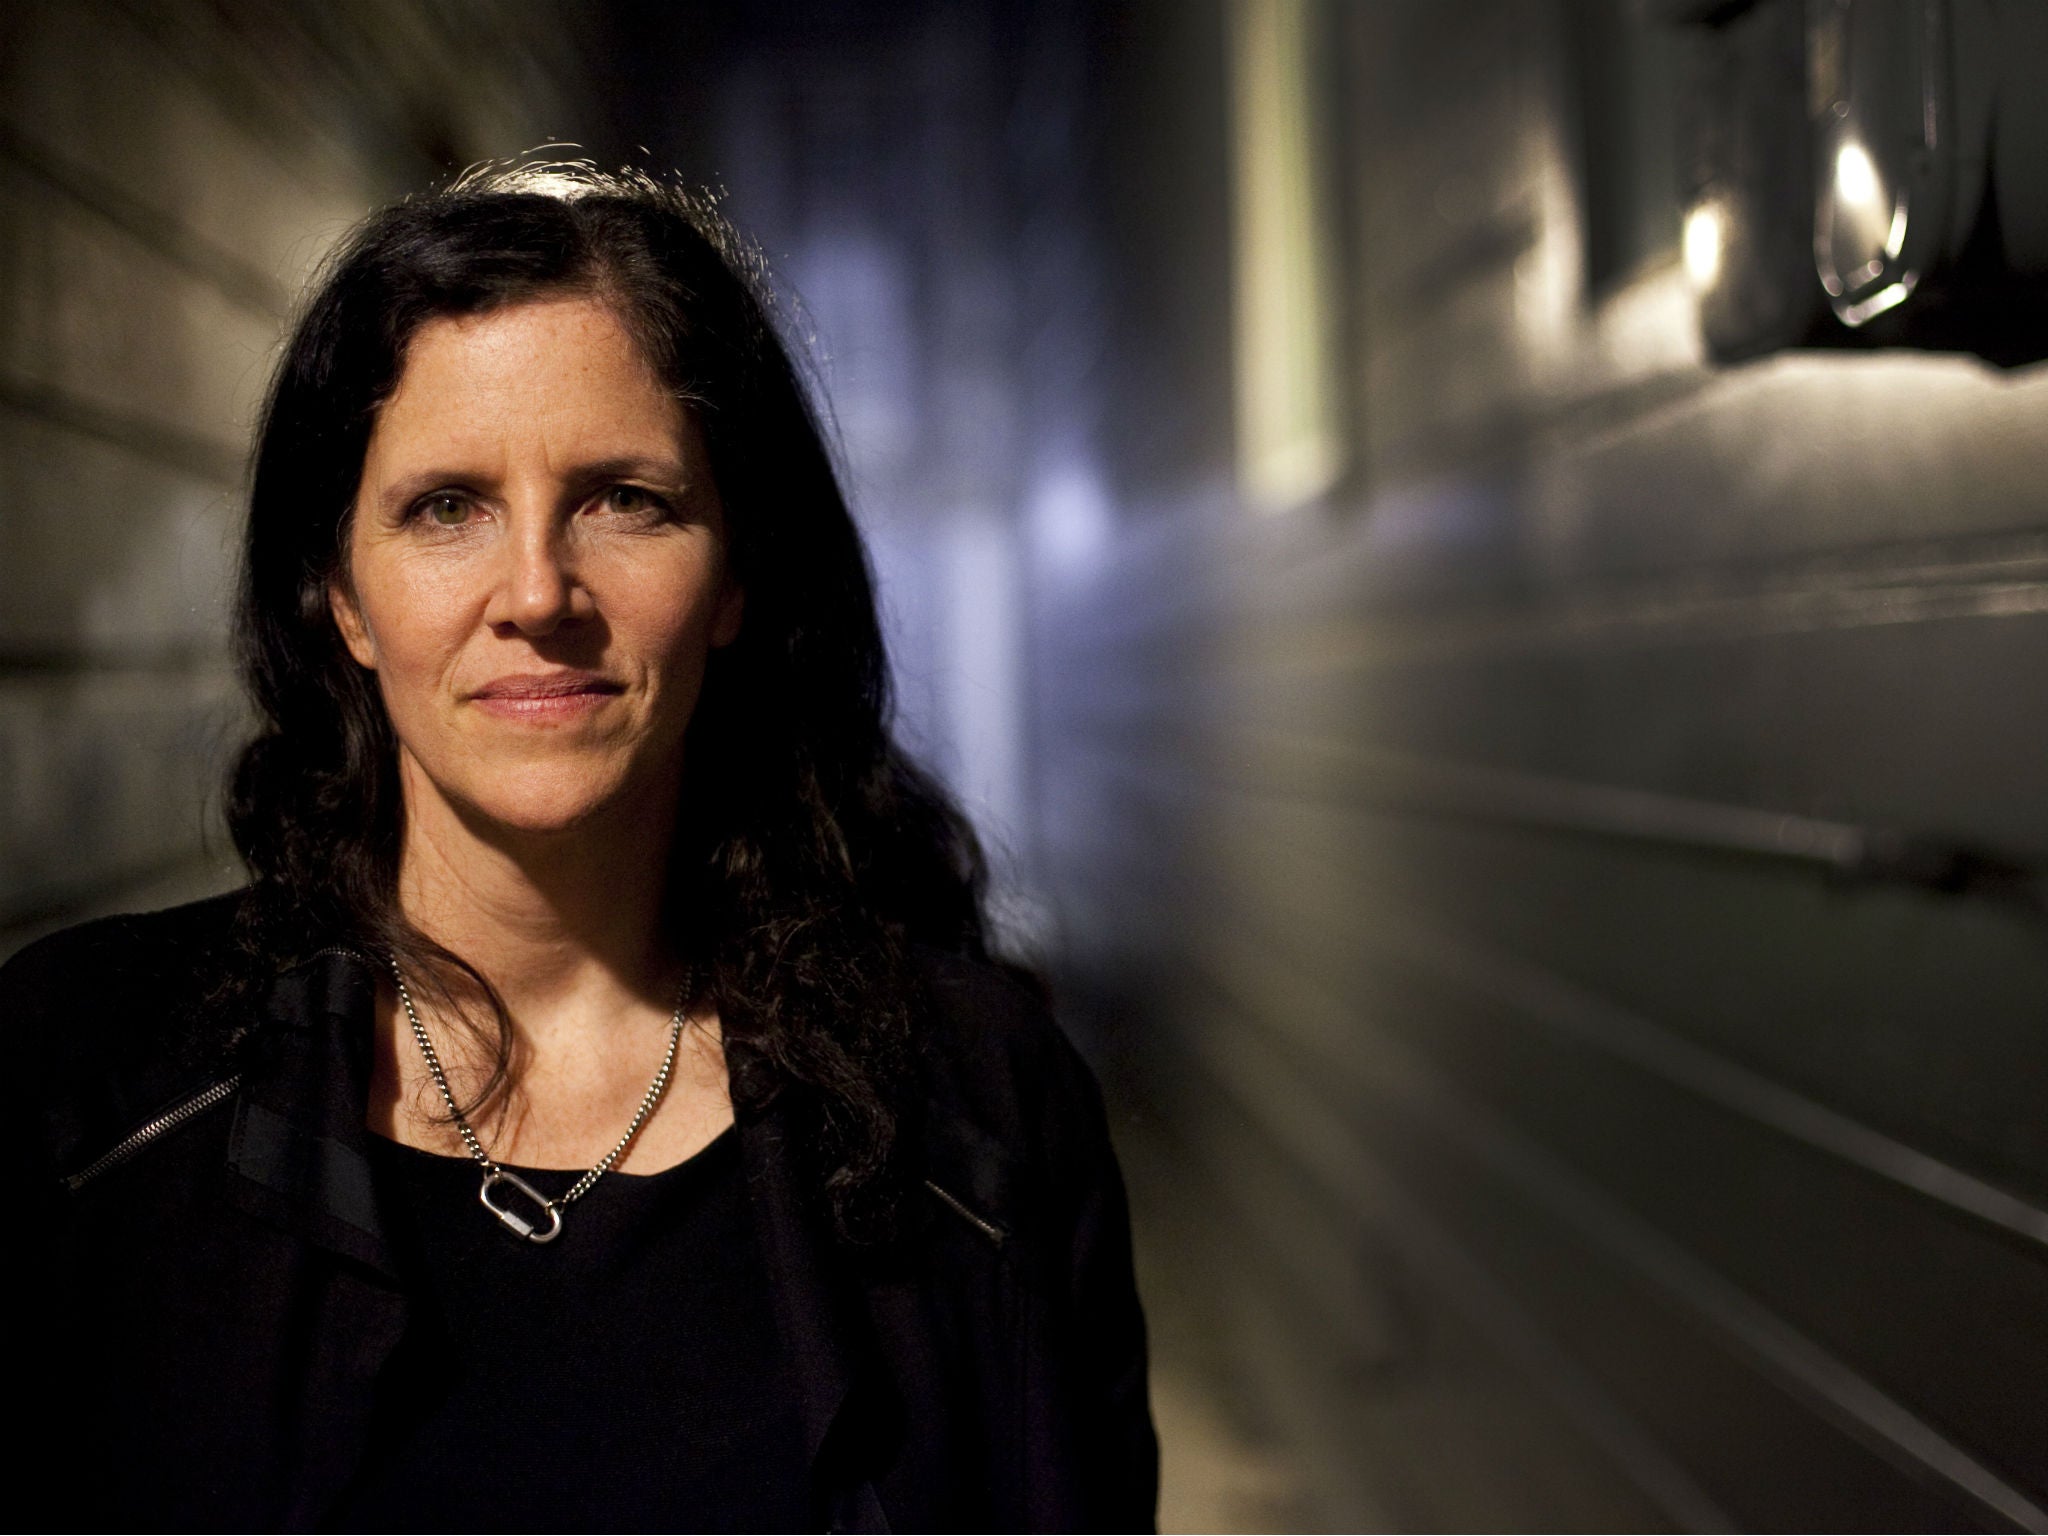 The filmmaker Laura Poitras fell out with Julian Assange while making the documentary 'Risk' about him